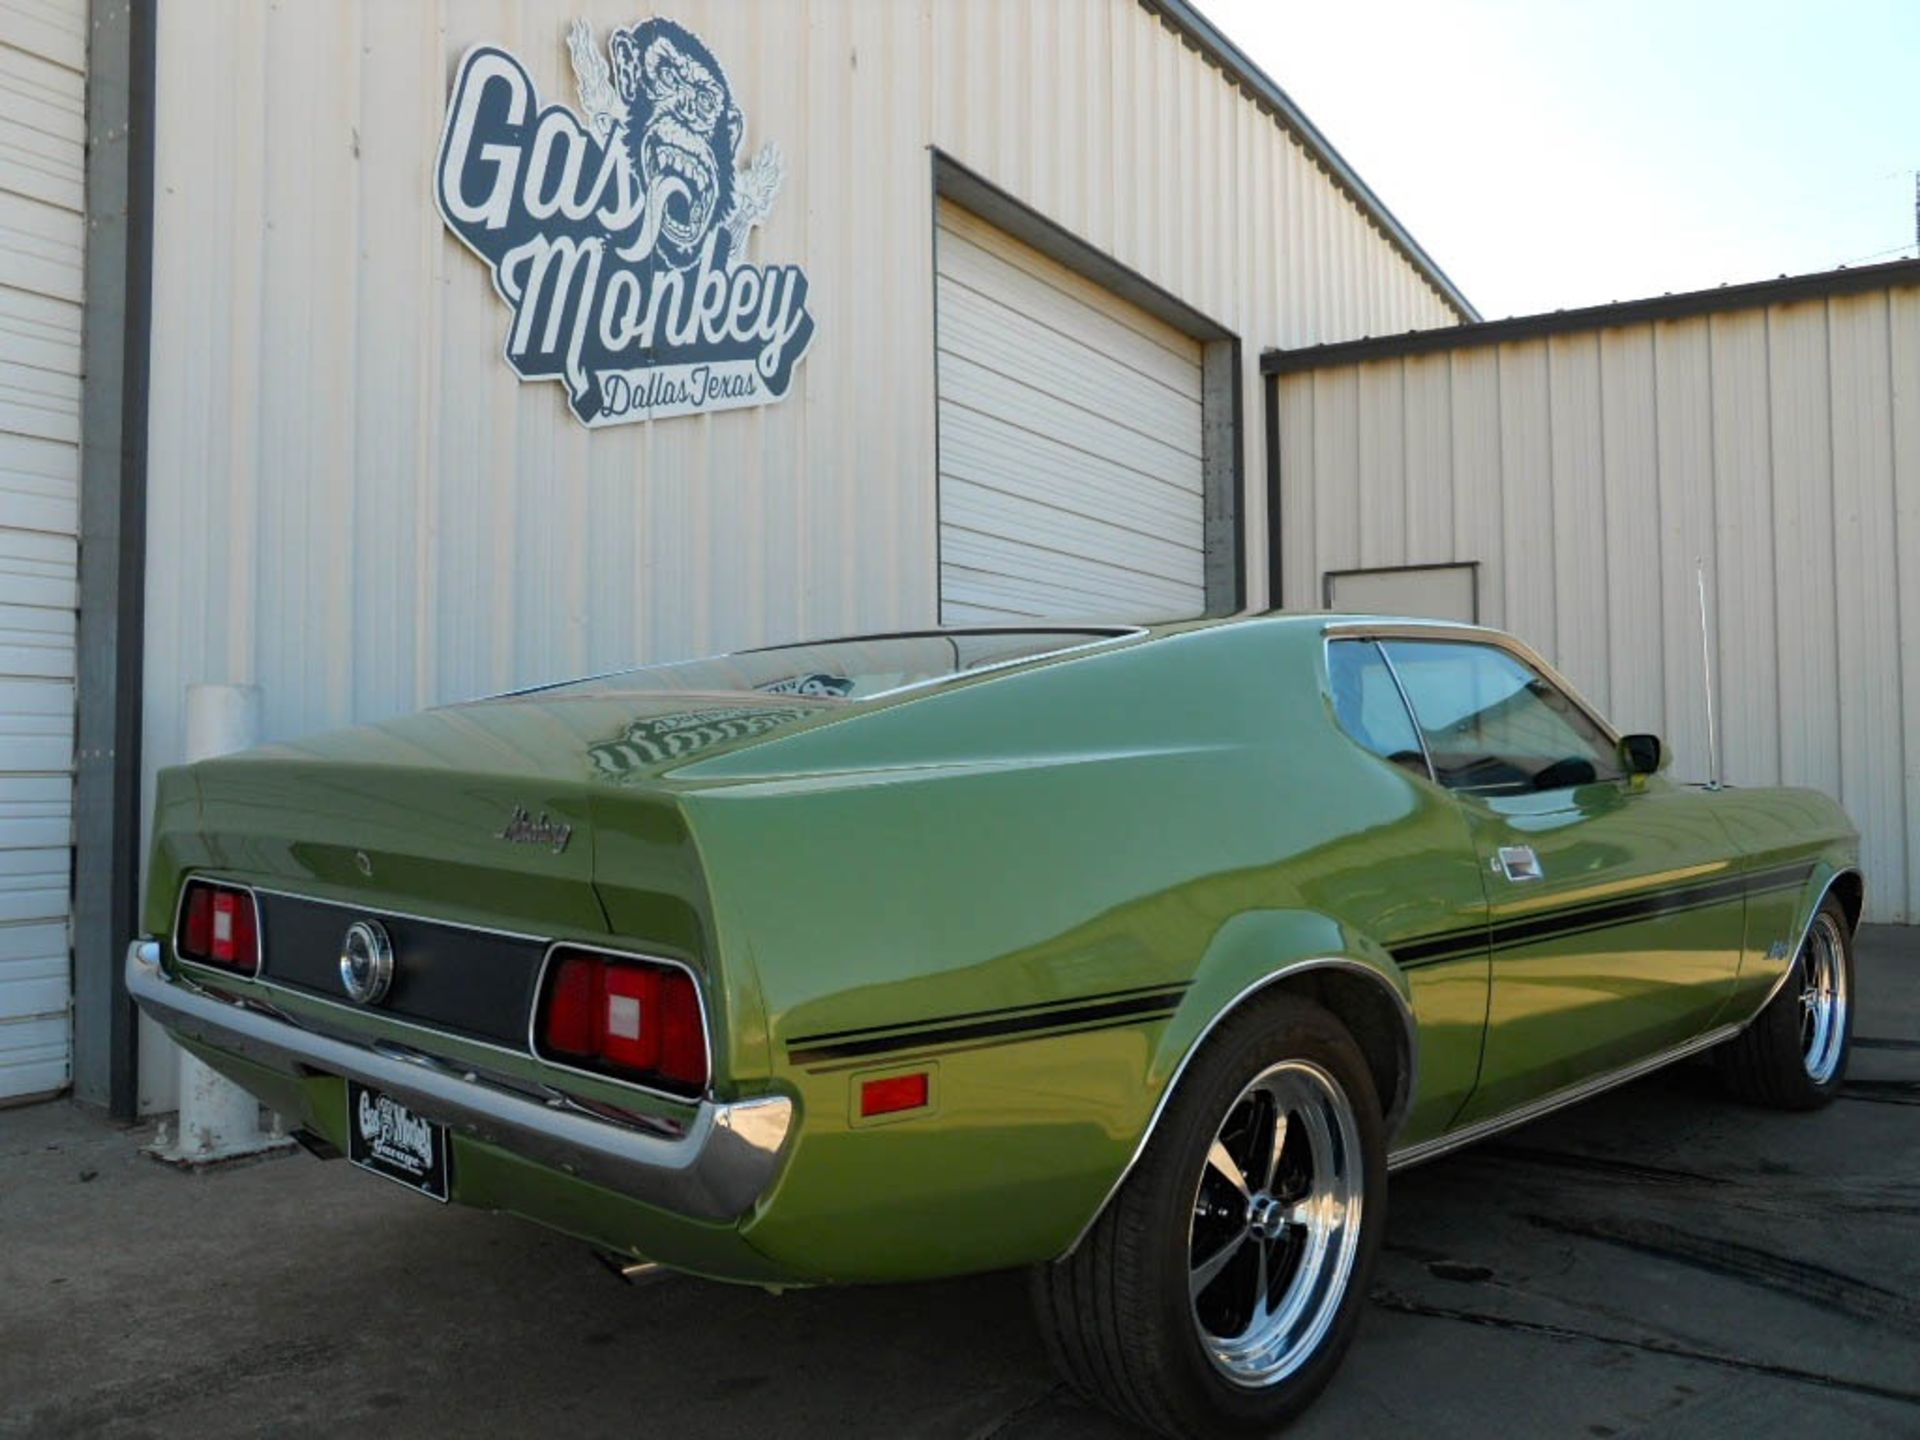 1972 Ford Mustang Fastback 302 V8 Automatic “Resto-Mod” undertaken by 'Gas Monkey' Garage - Image 3 of 14